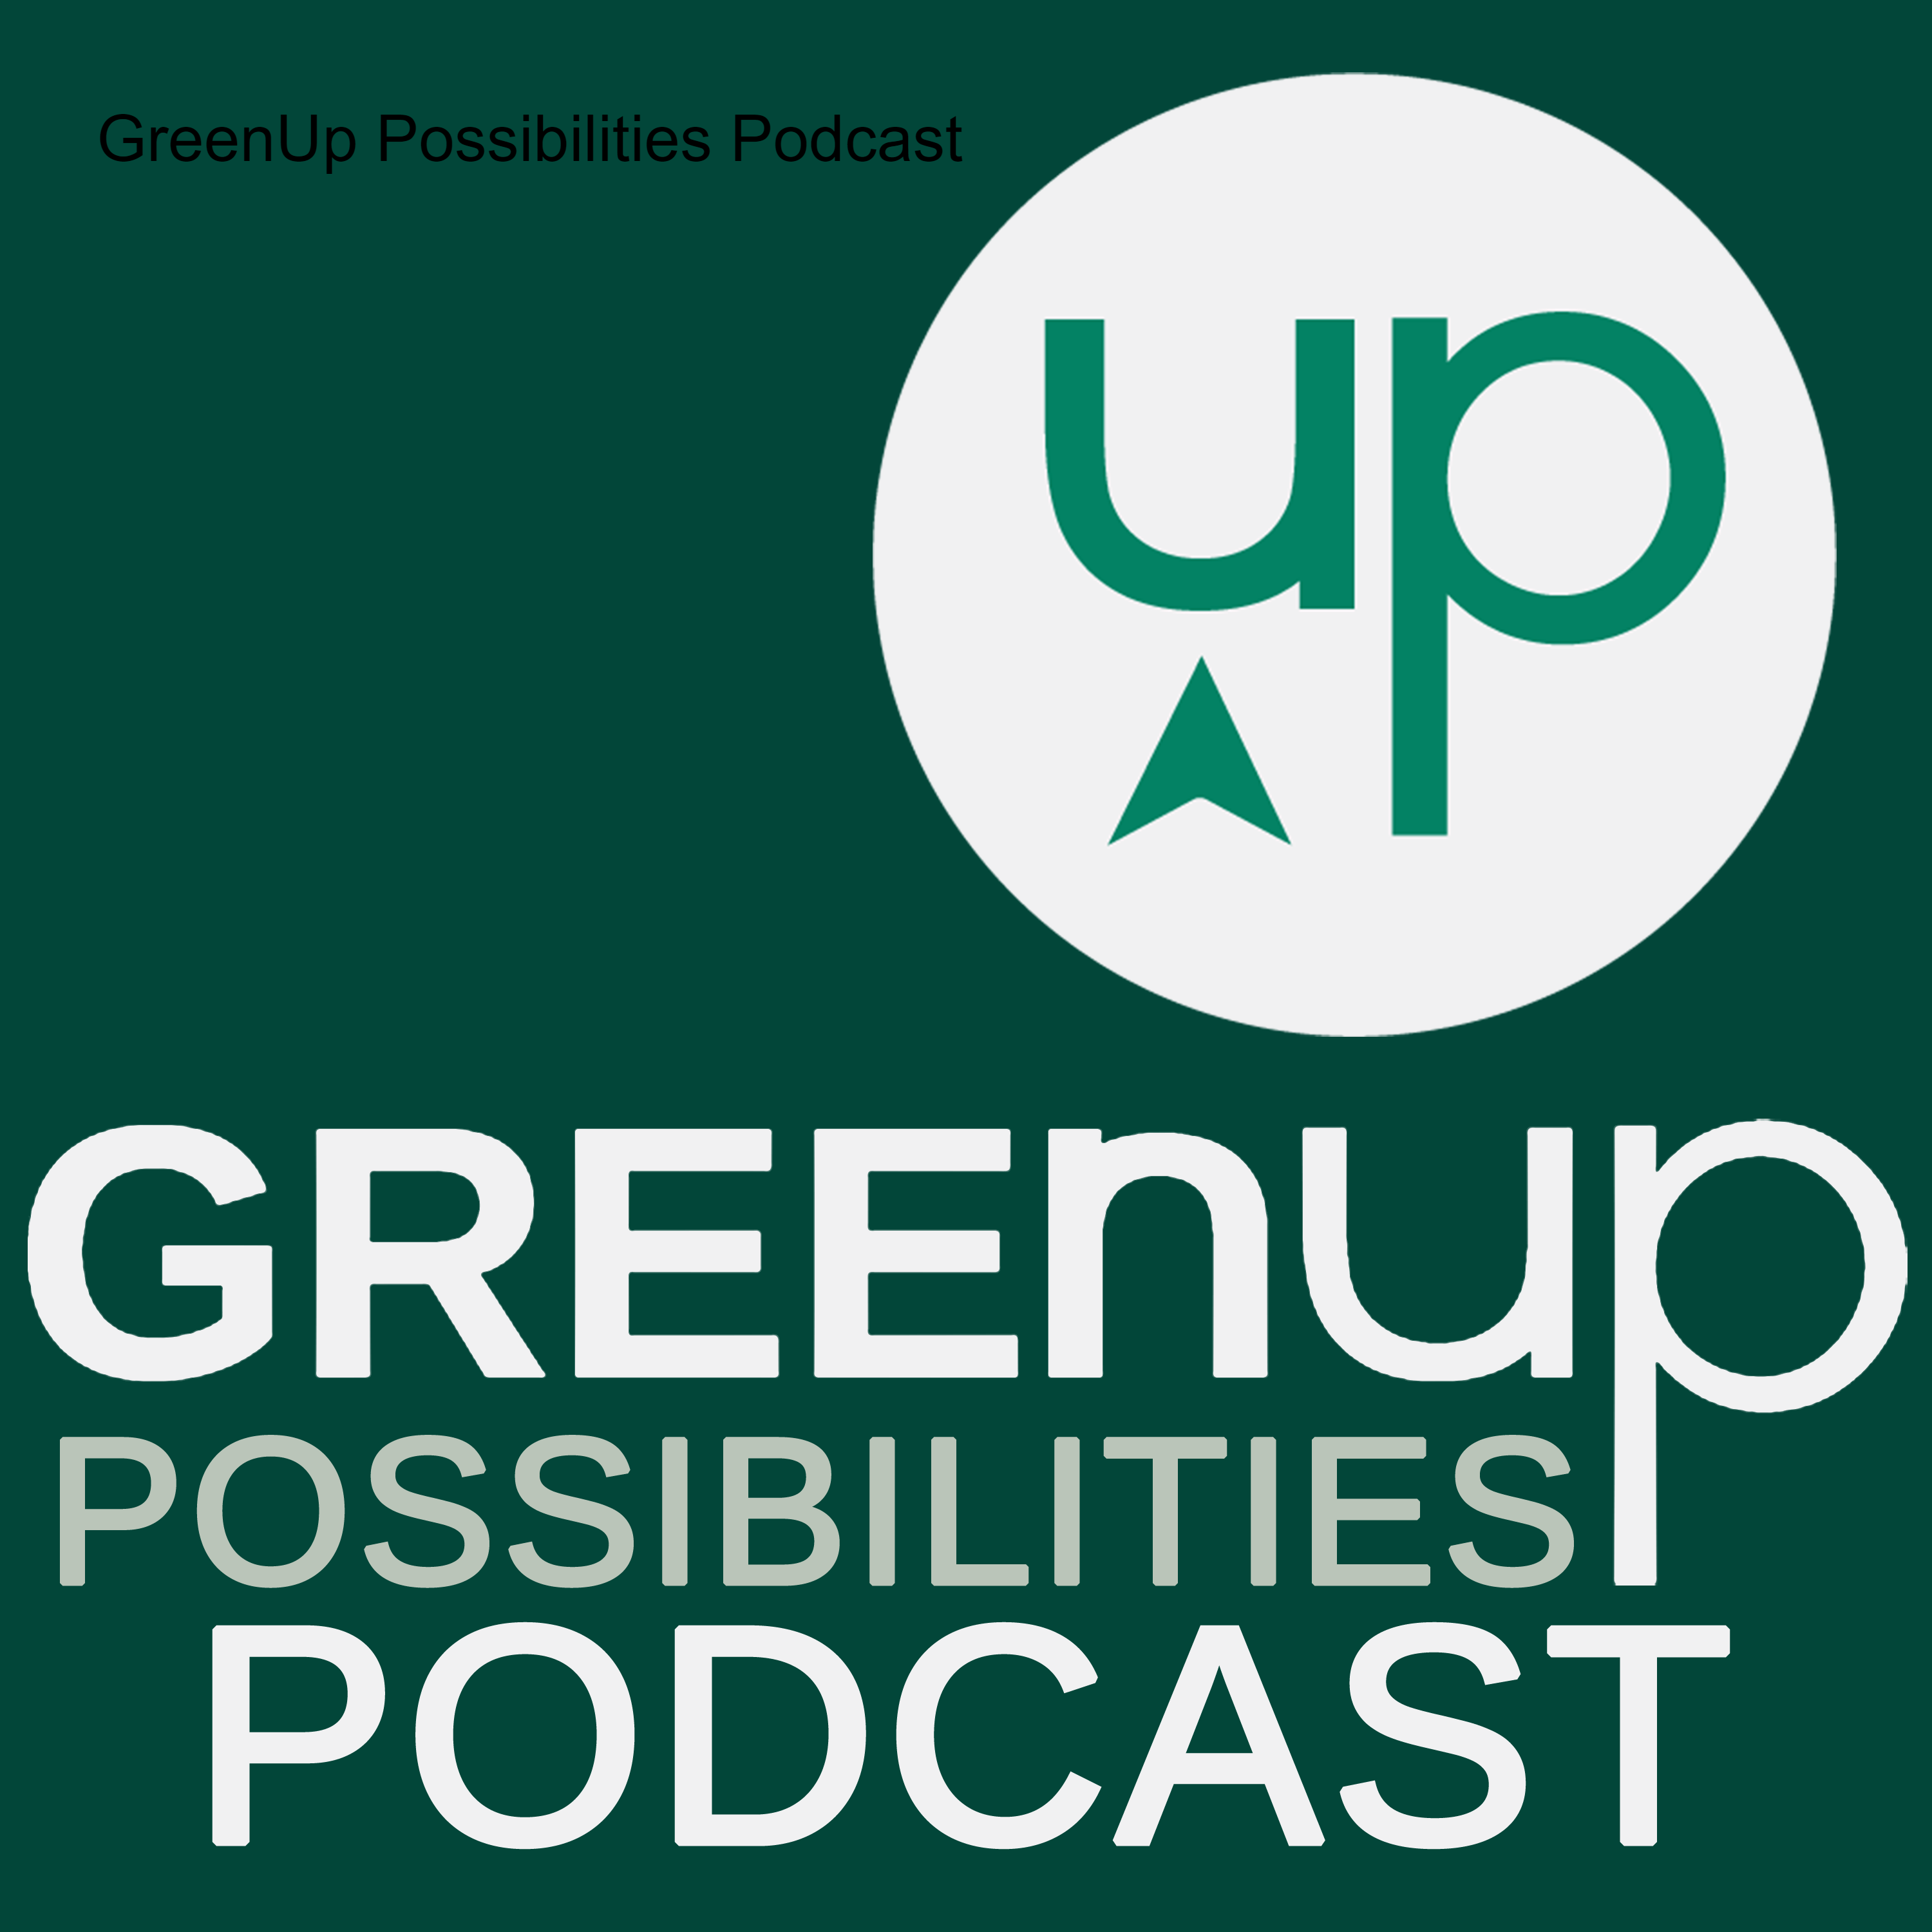 GreenUp Possibilities Podcast